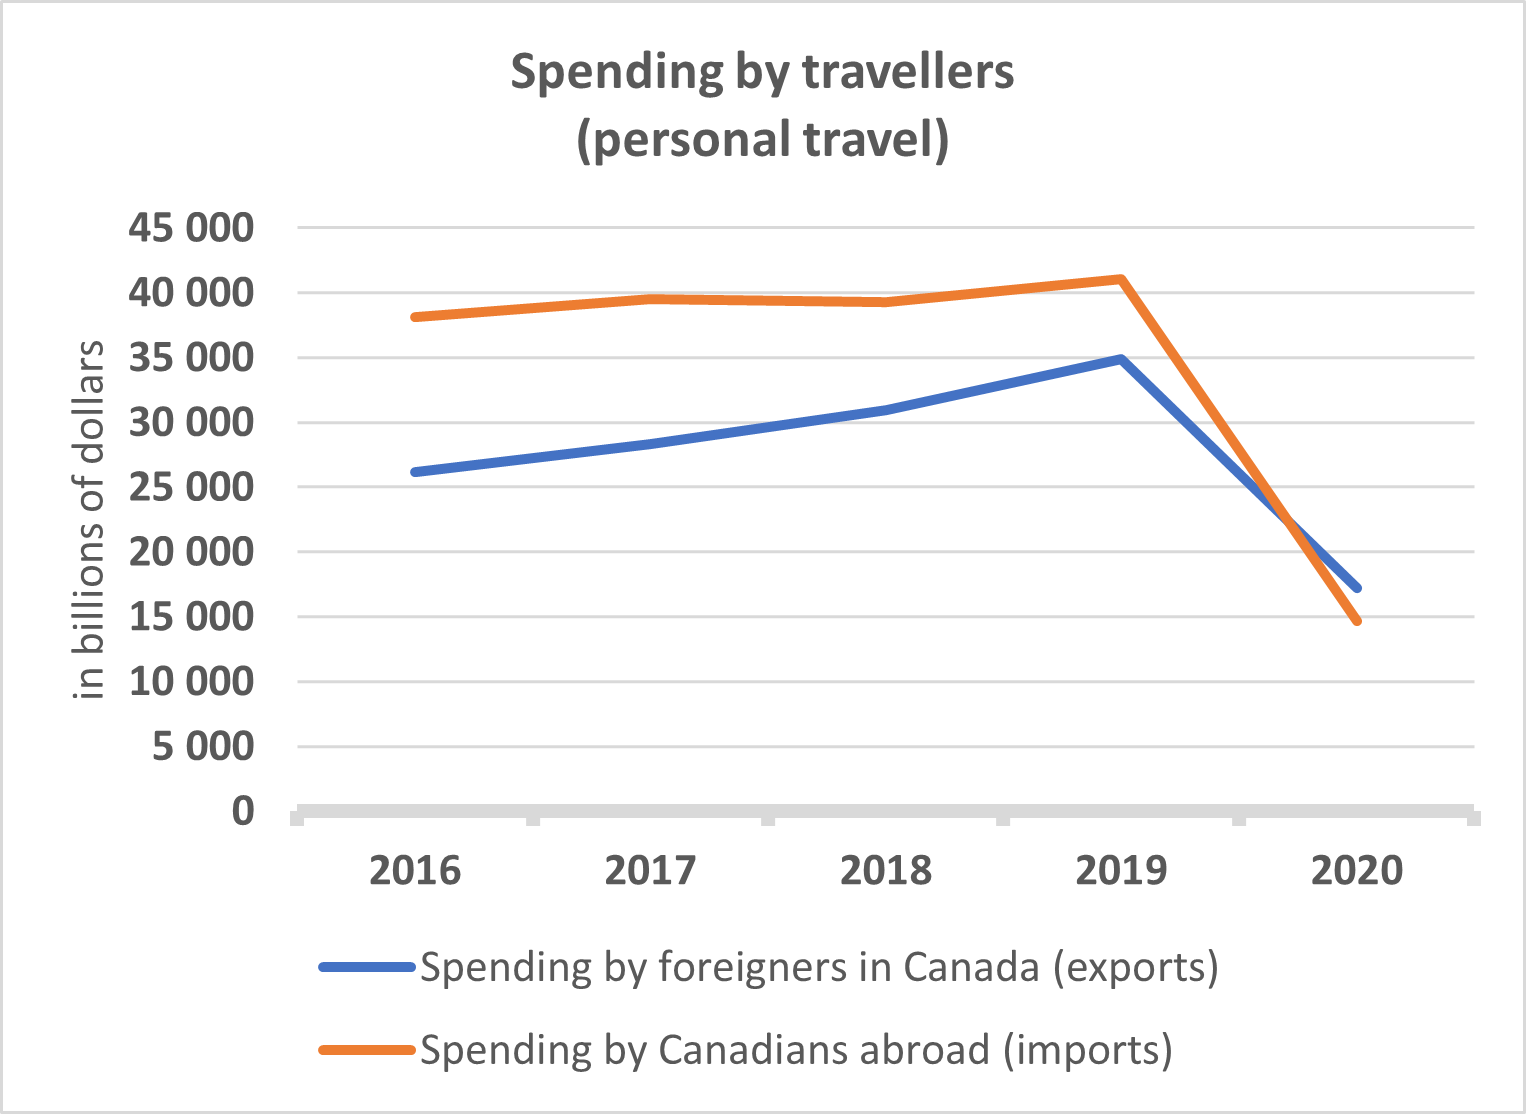 Graphic illustrating the 64% drop in spending by Canadians abroad from 2019 to 2020.